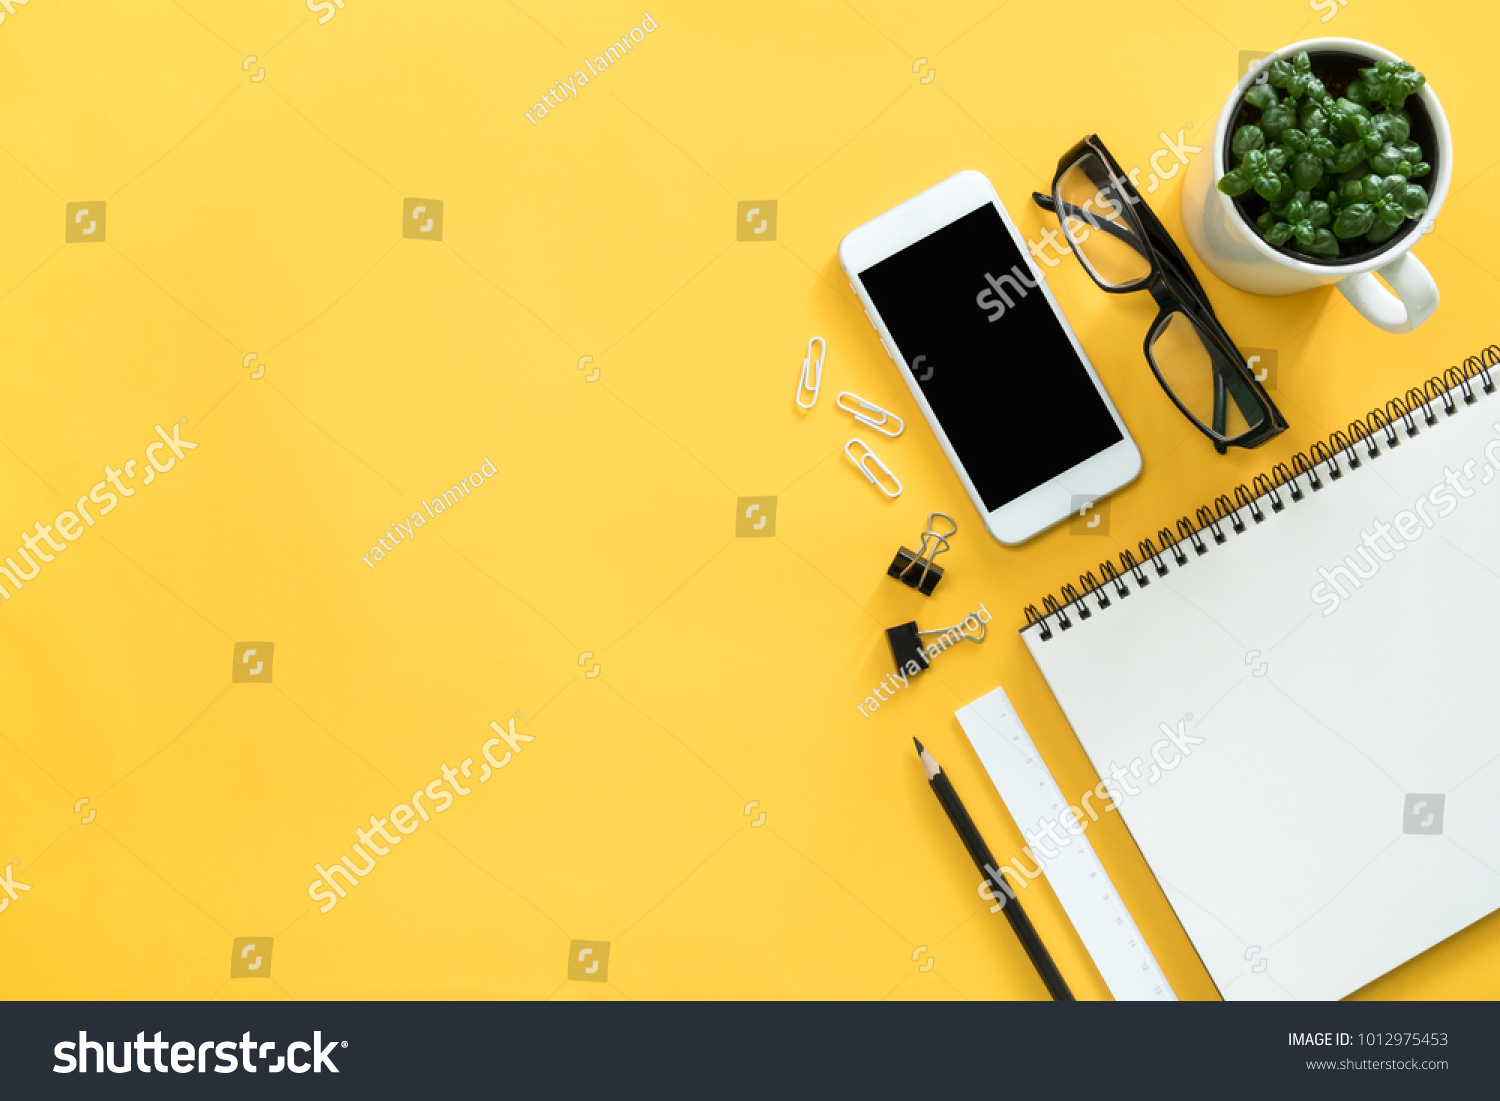 Mock up smartphone with office accessories on yellow background #1012975453